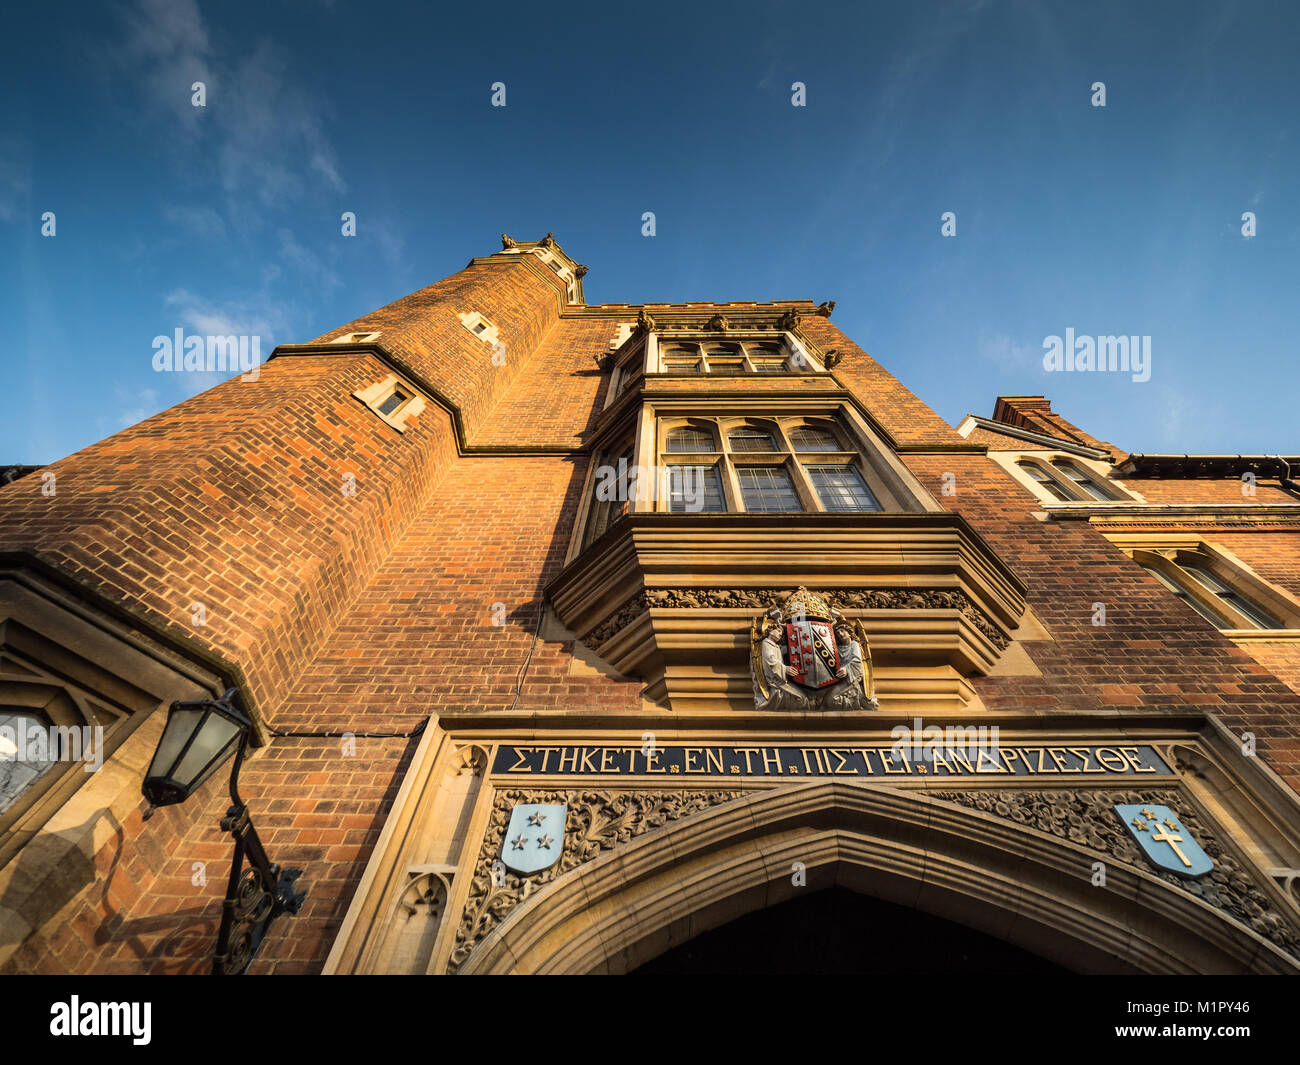 Selwyn College Cambridge - Main Gate with the Greek quotation which contains the College motto ('Quit ye like men' or 'Be Courageous') Stock Photo